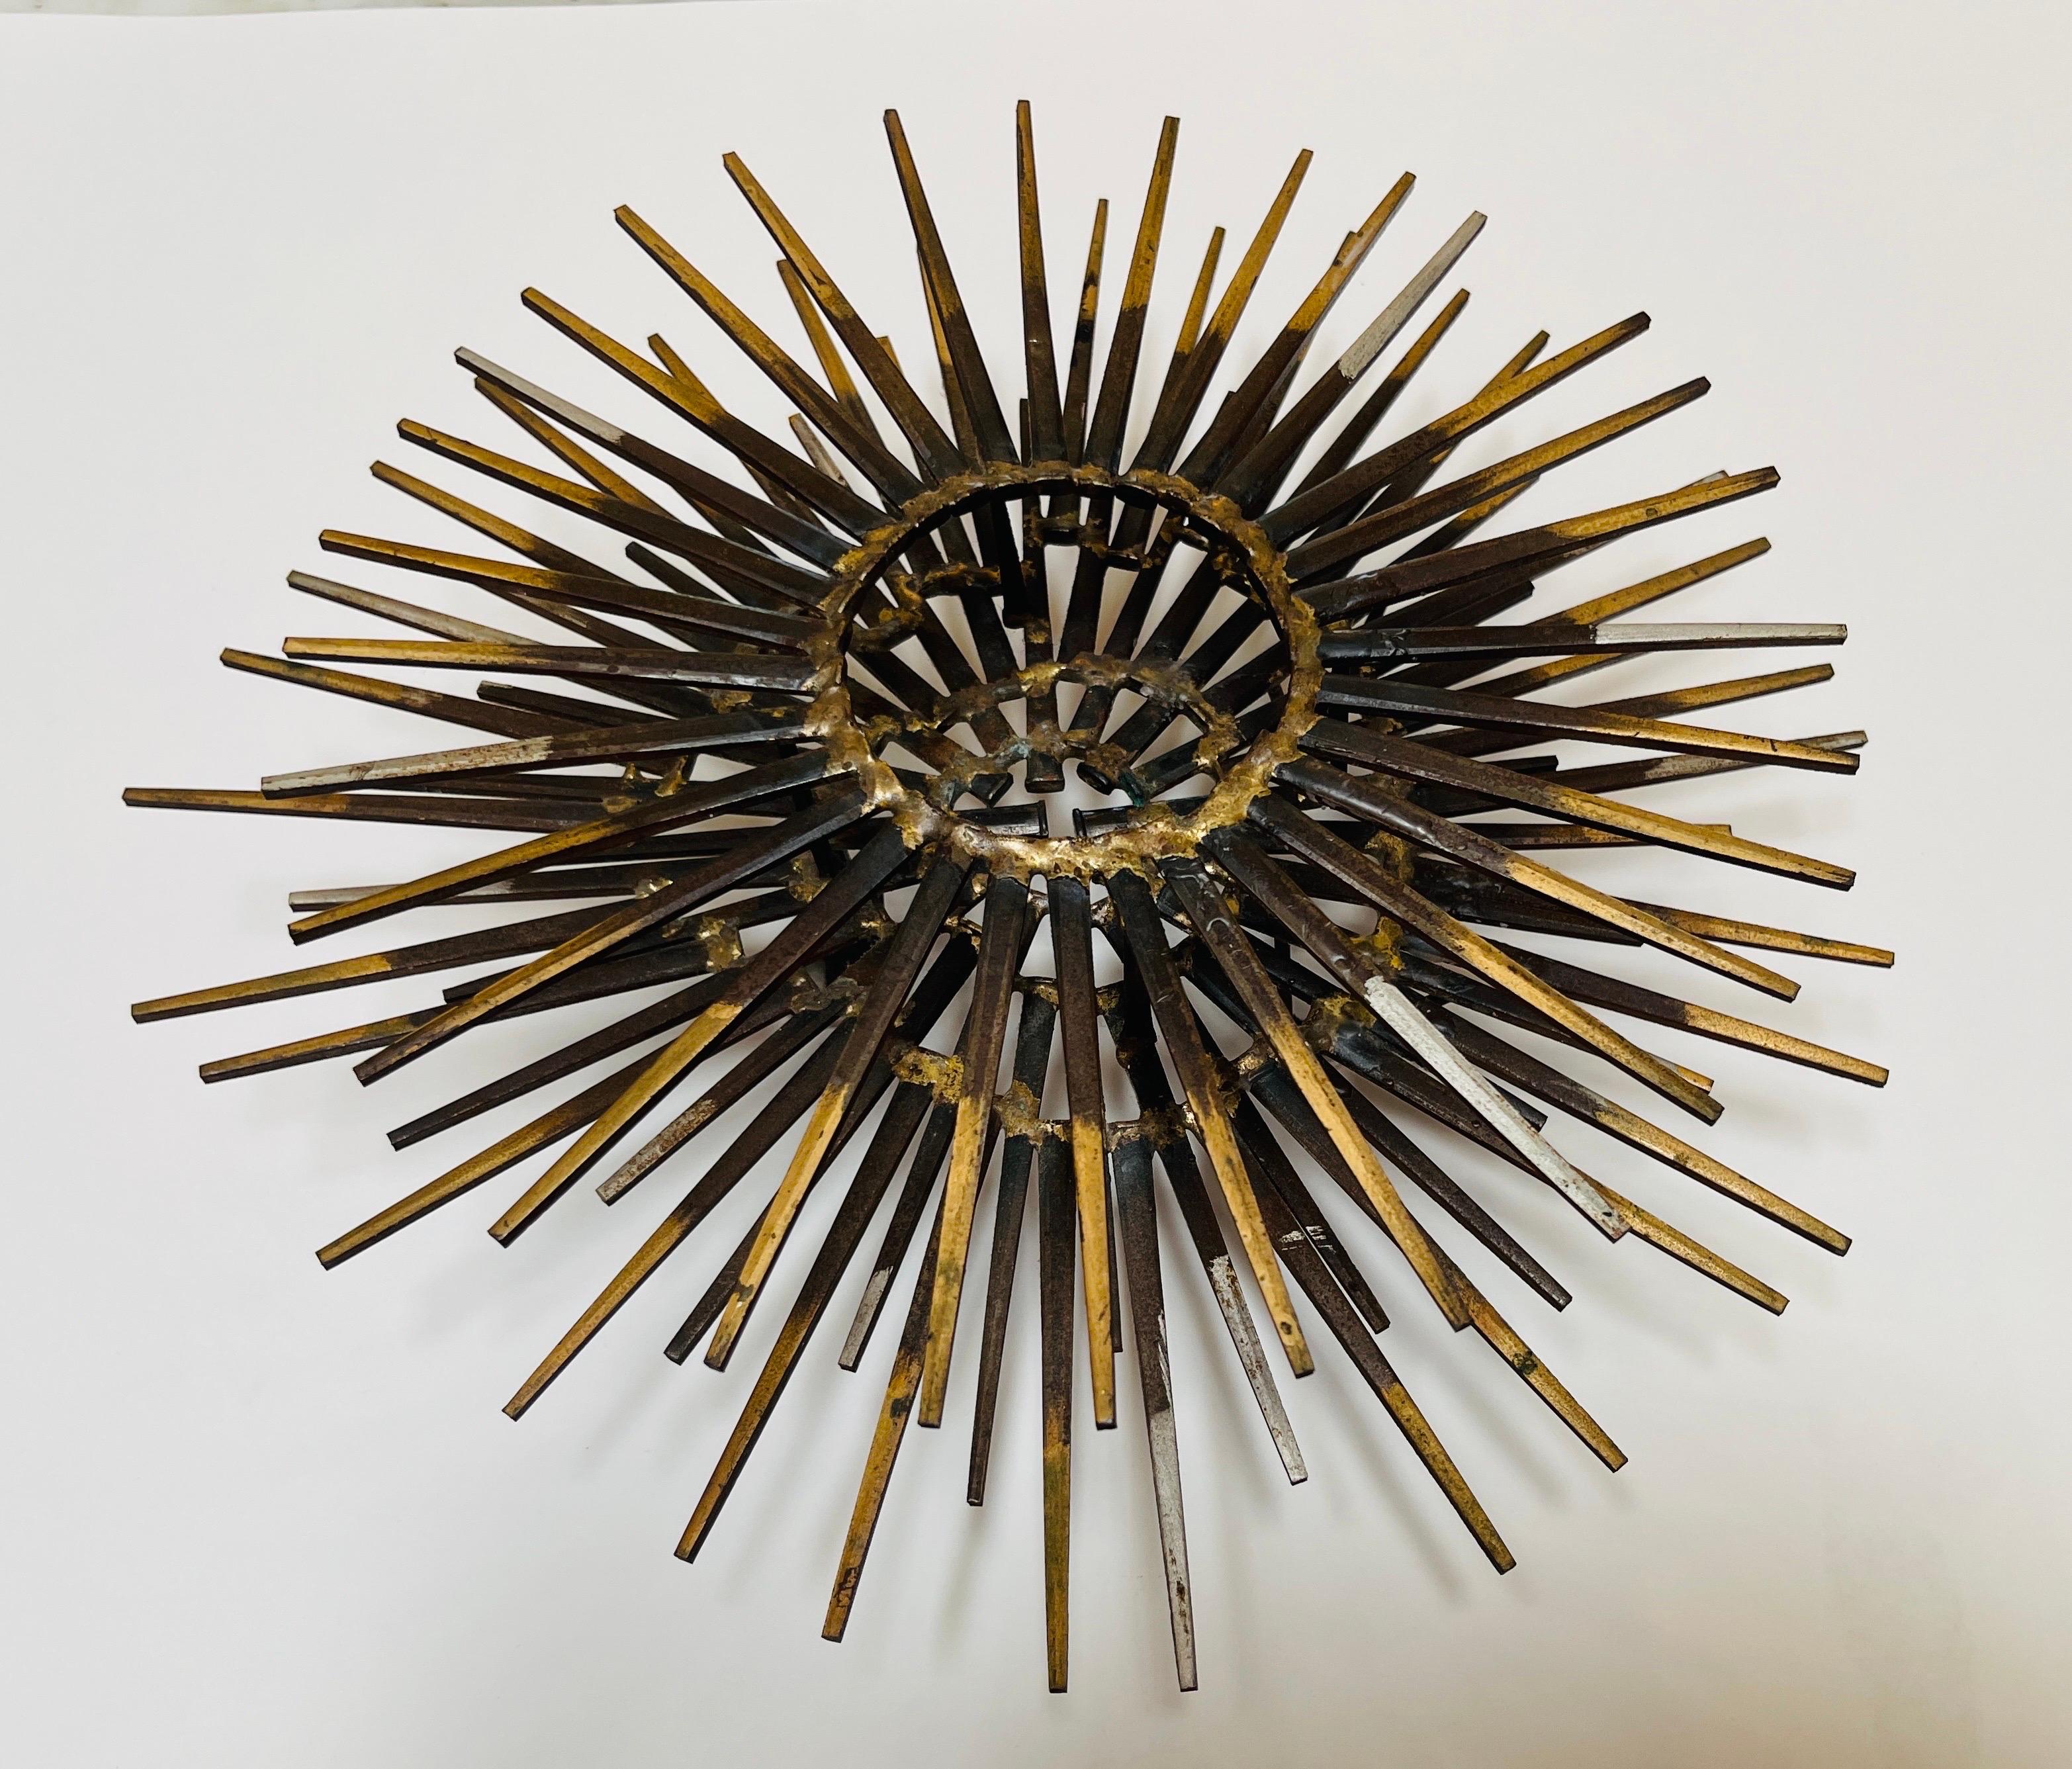 Mid-Century Modern Diminutive Gilt Iron Two-Tier Sunburst Wall Sculpture by William Bowie For Sale